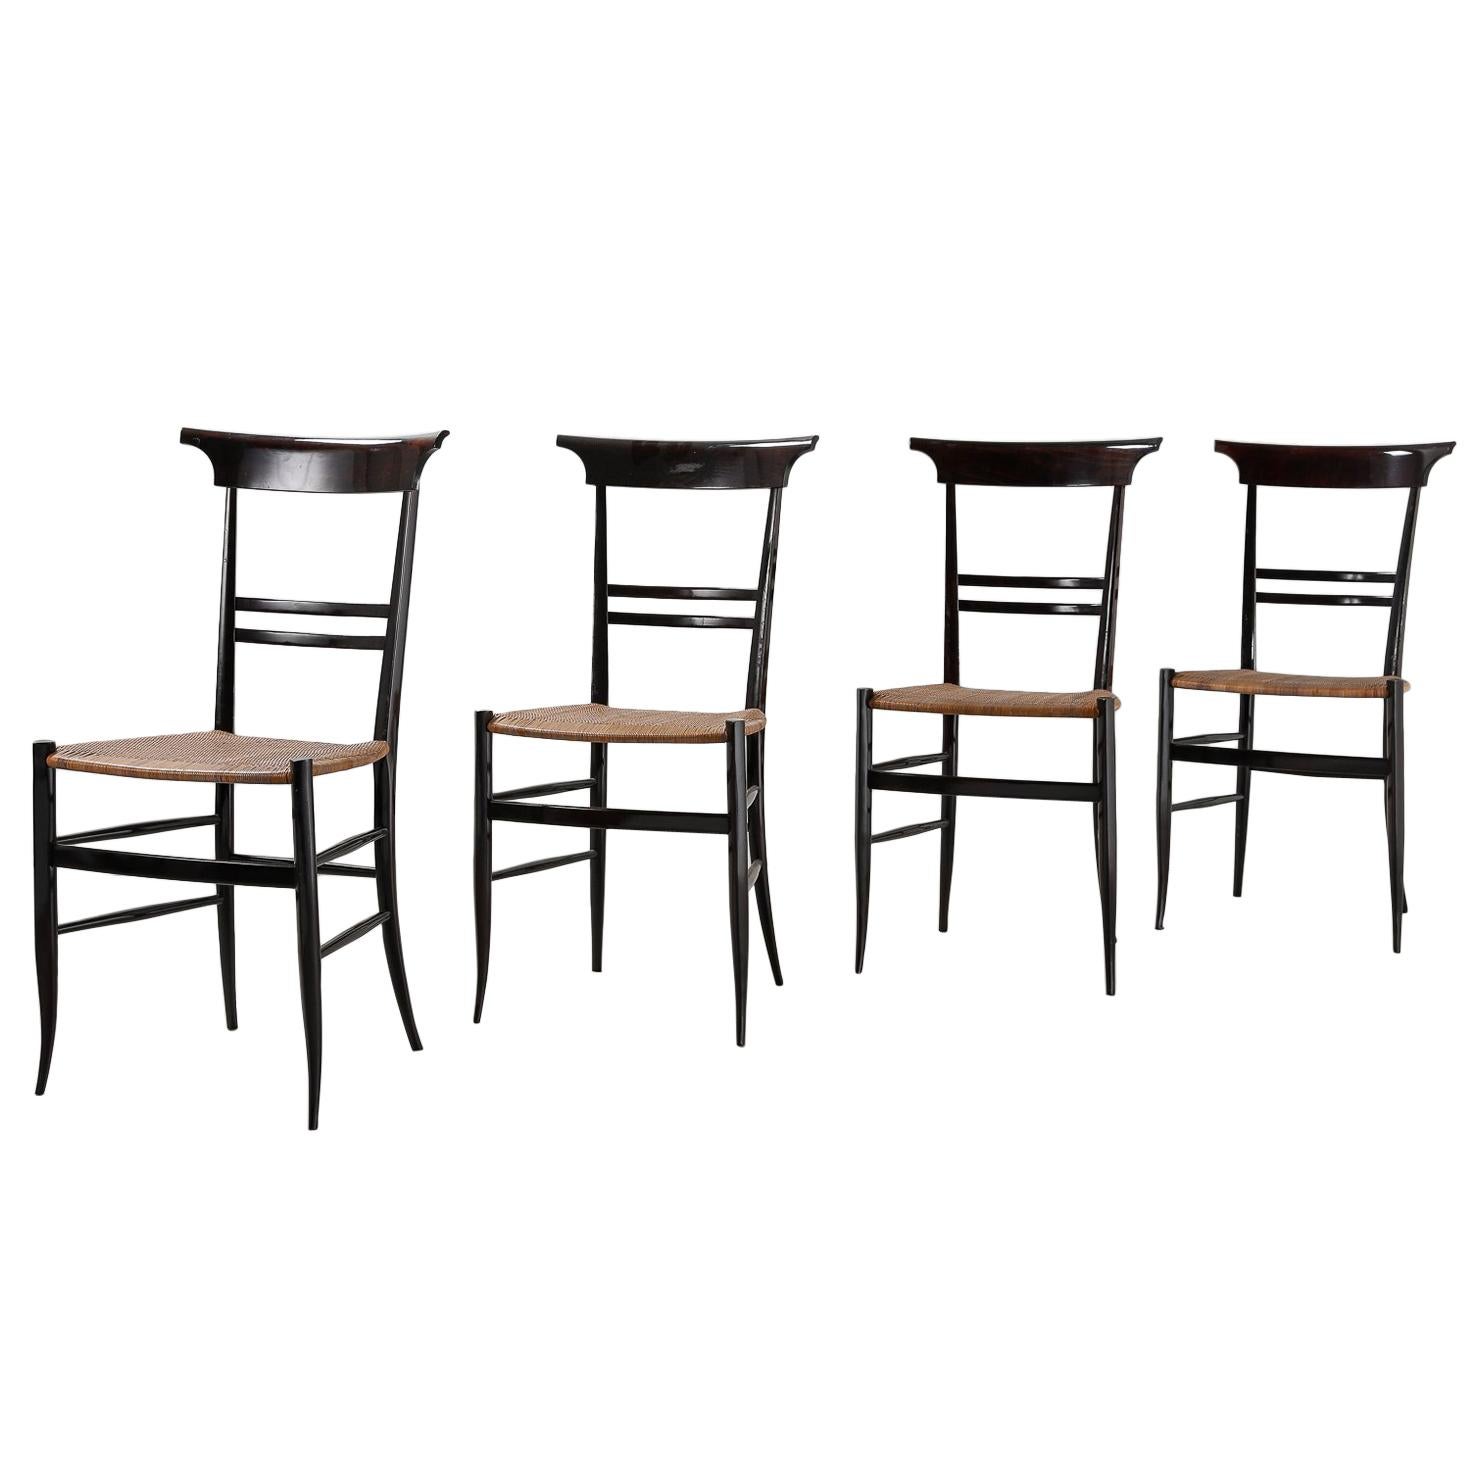 Set of 4 Dining Chairs, Black Frame and Cane Seat